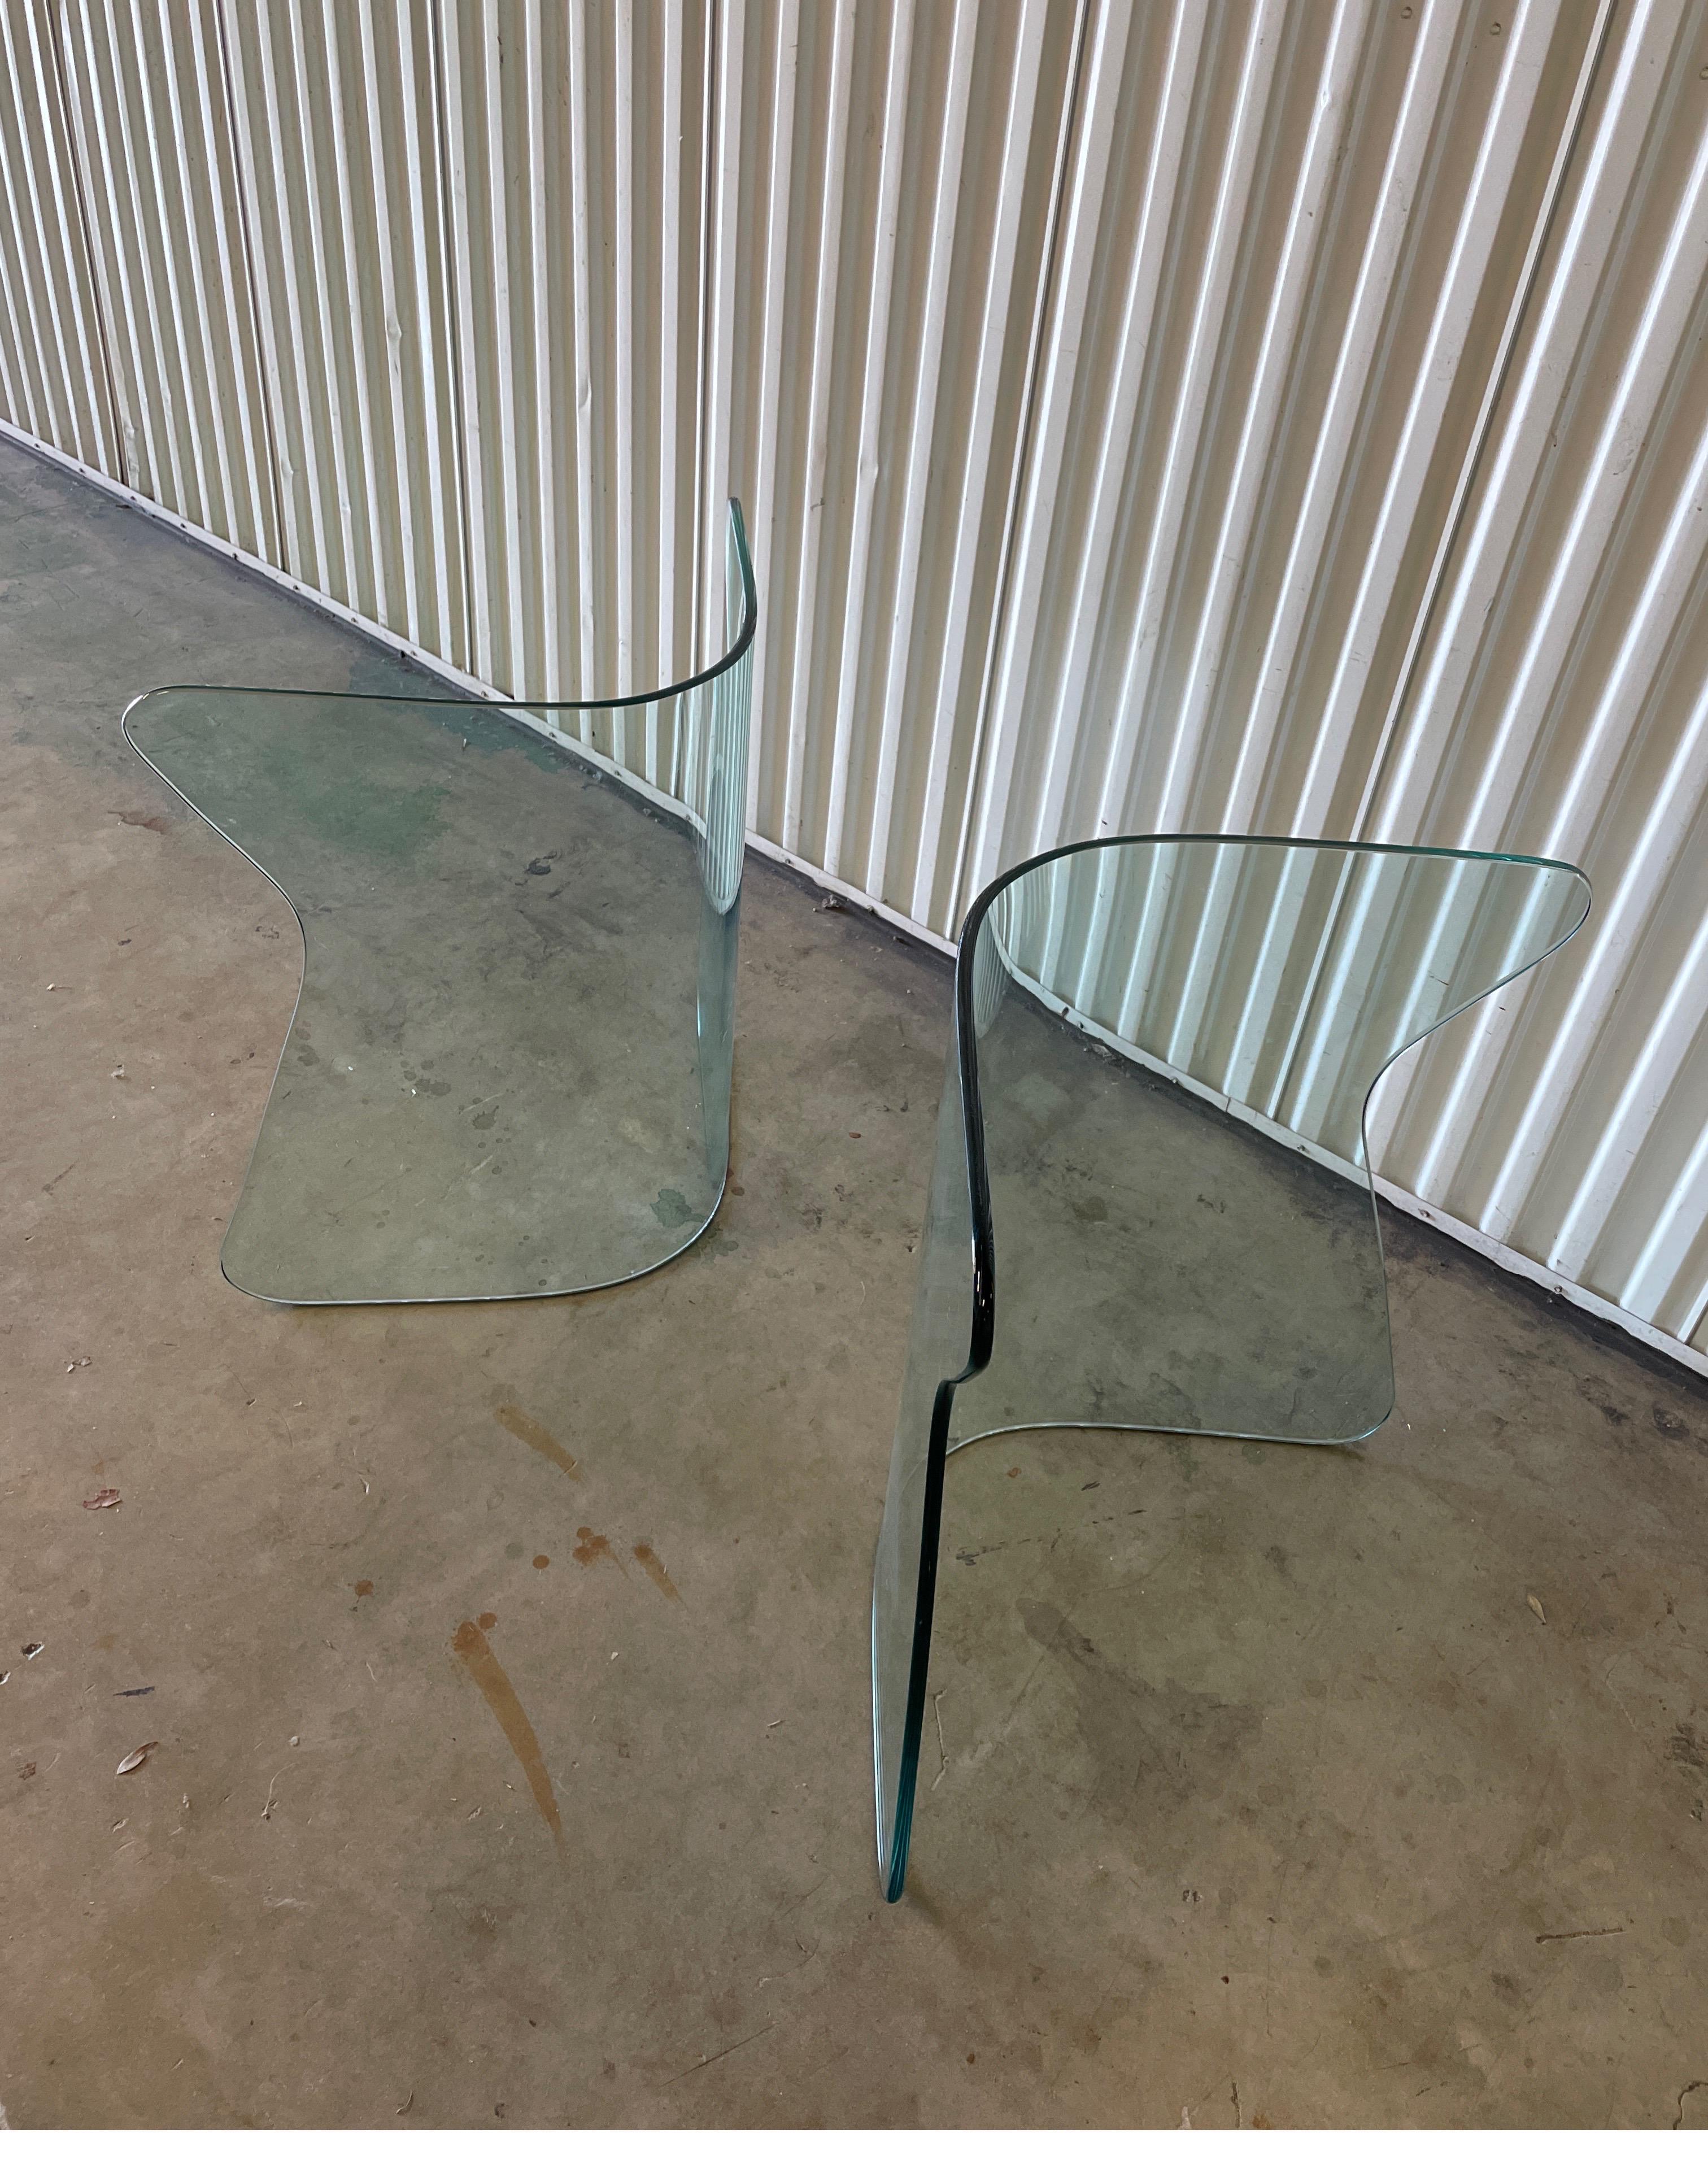 Pair of curved glass dining table bases in the Mid Century Modern style. Just add the glass top of your choice & size to make a very dramatic statement.